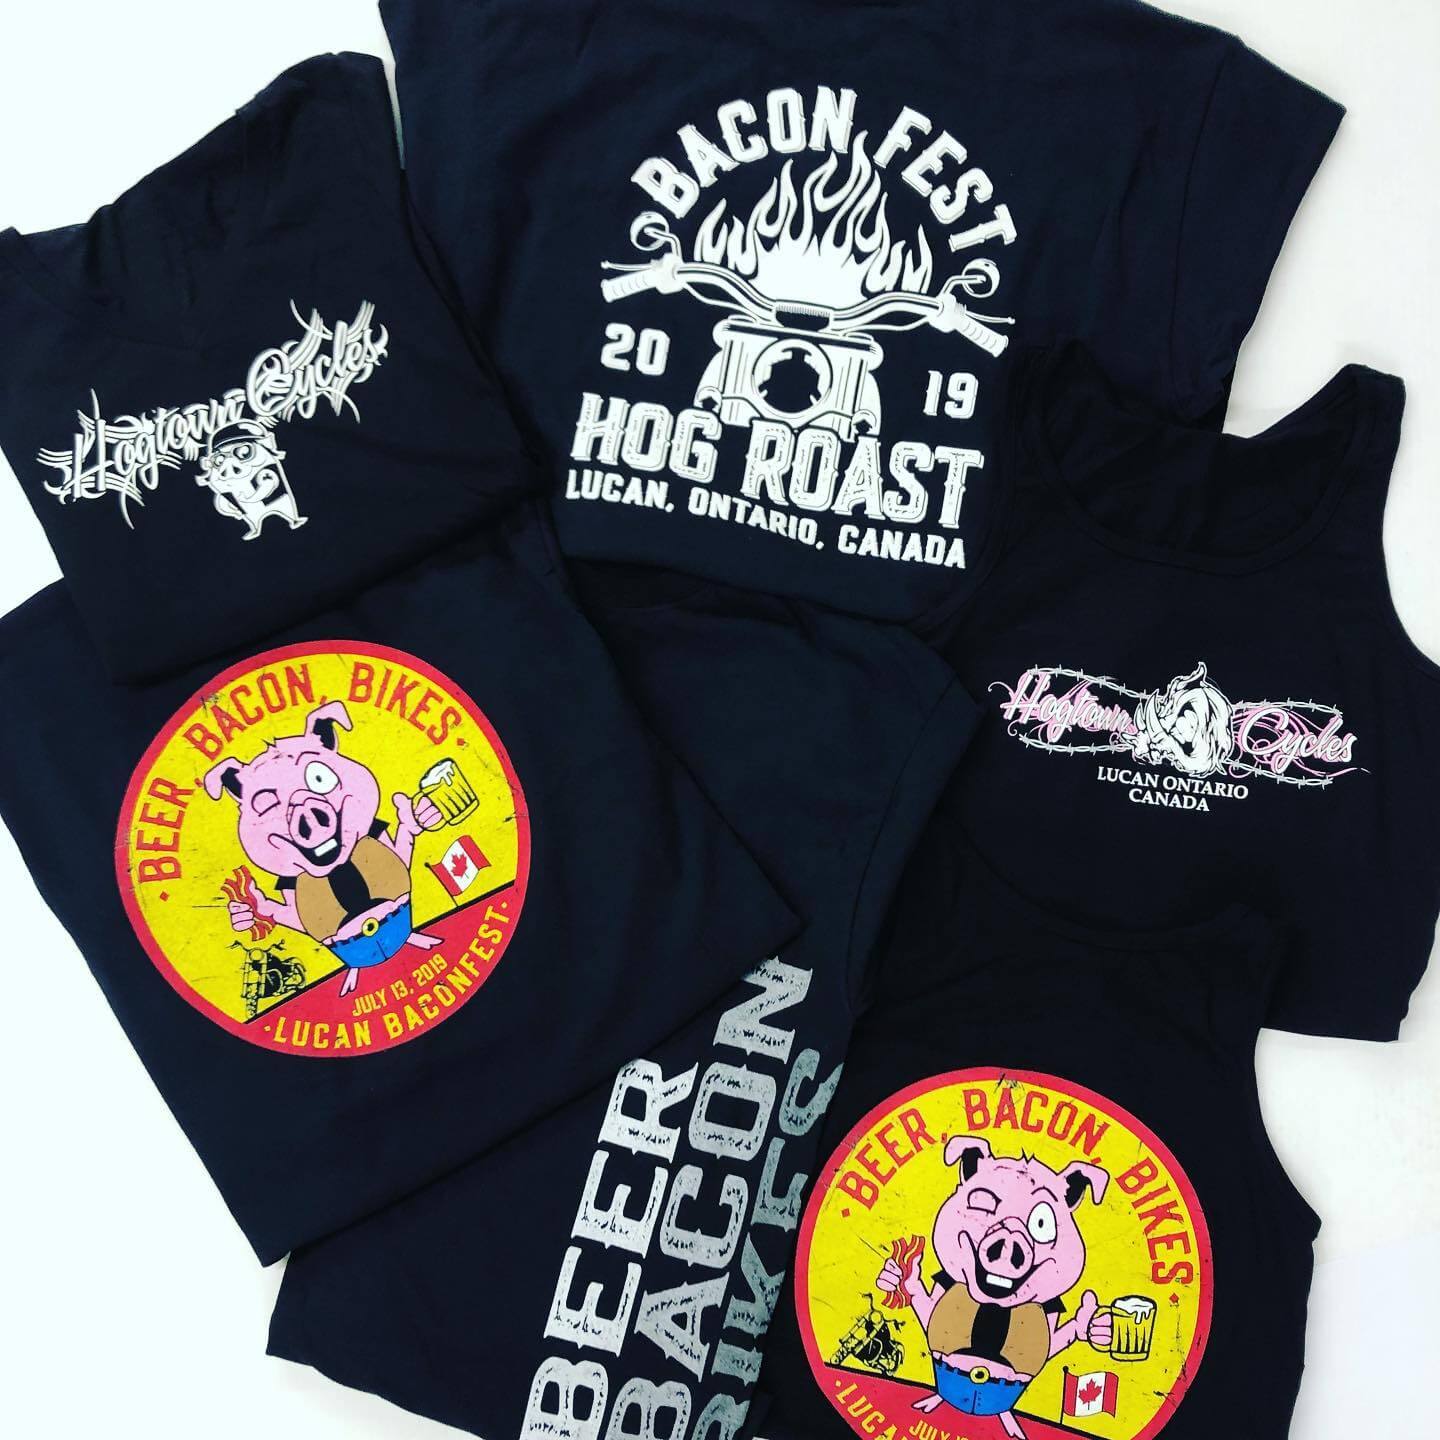 Baconfest 2019 apparel available at Hogtown Cycles